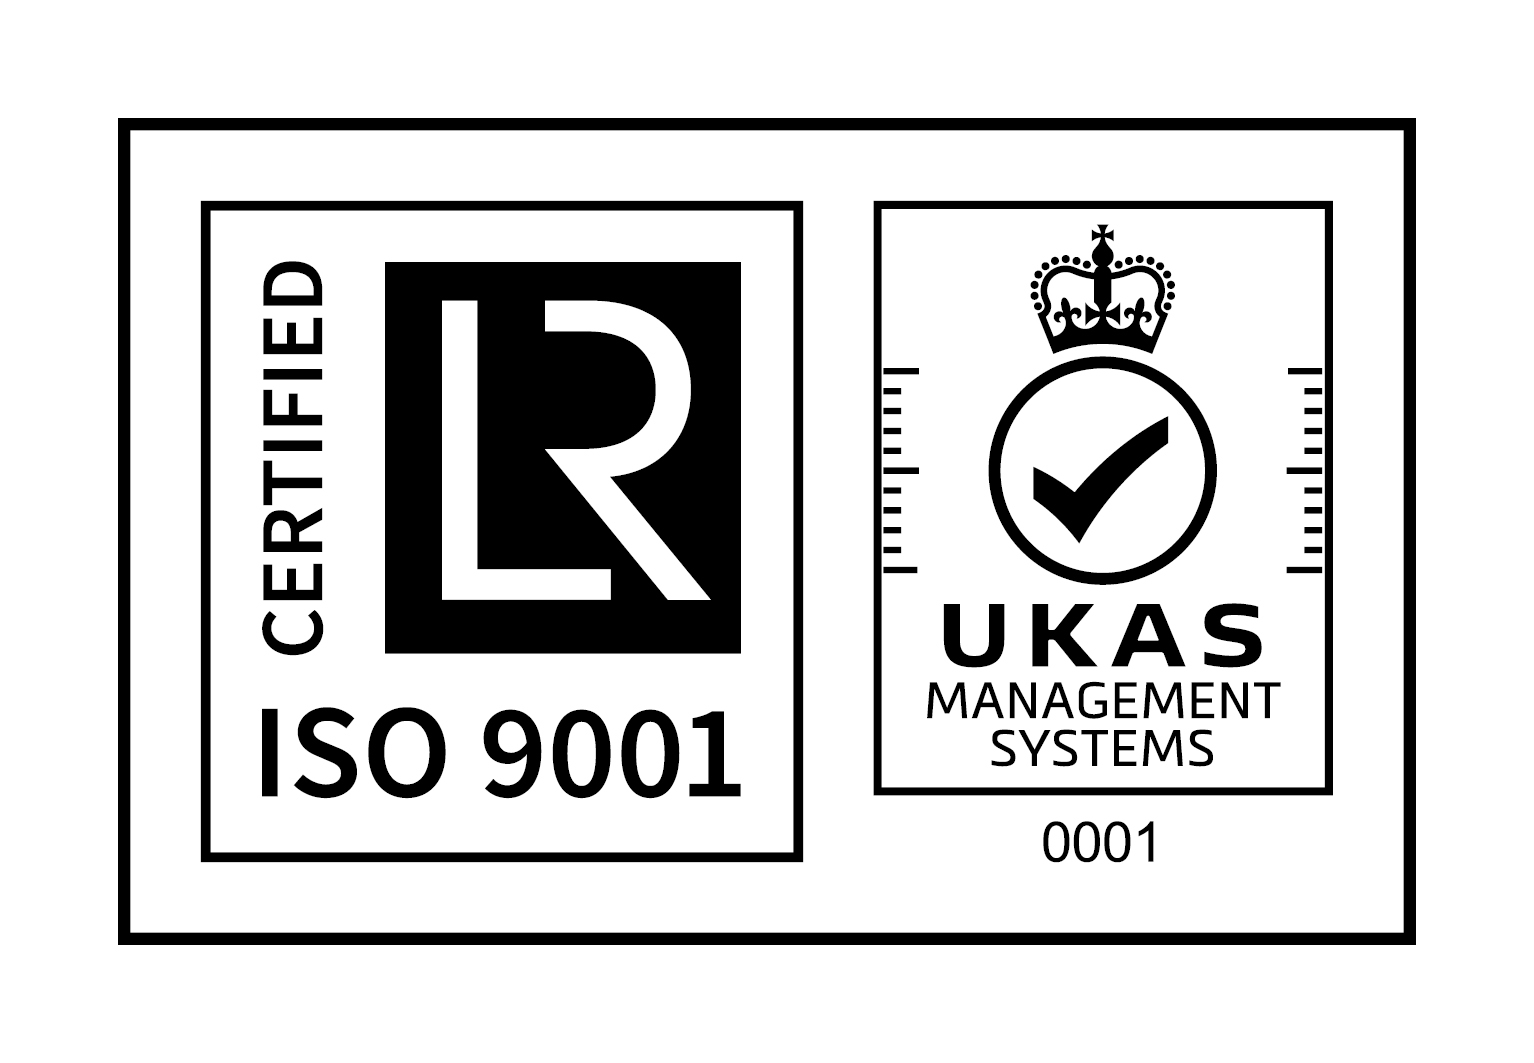 UKAS AND ISO 9001